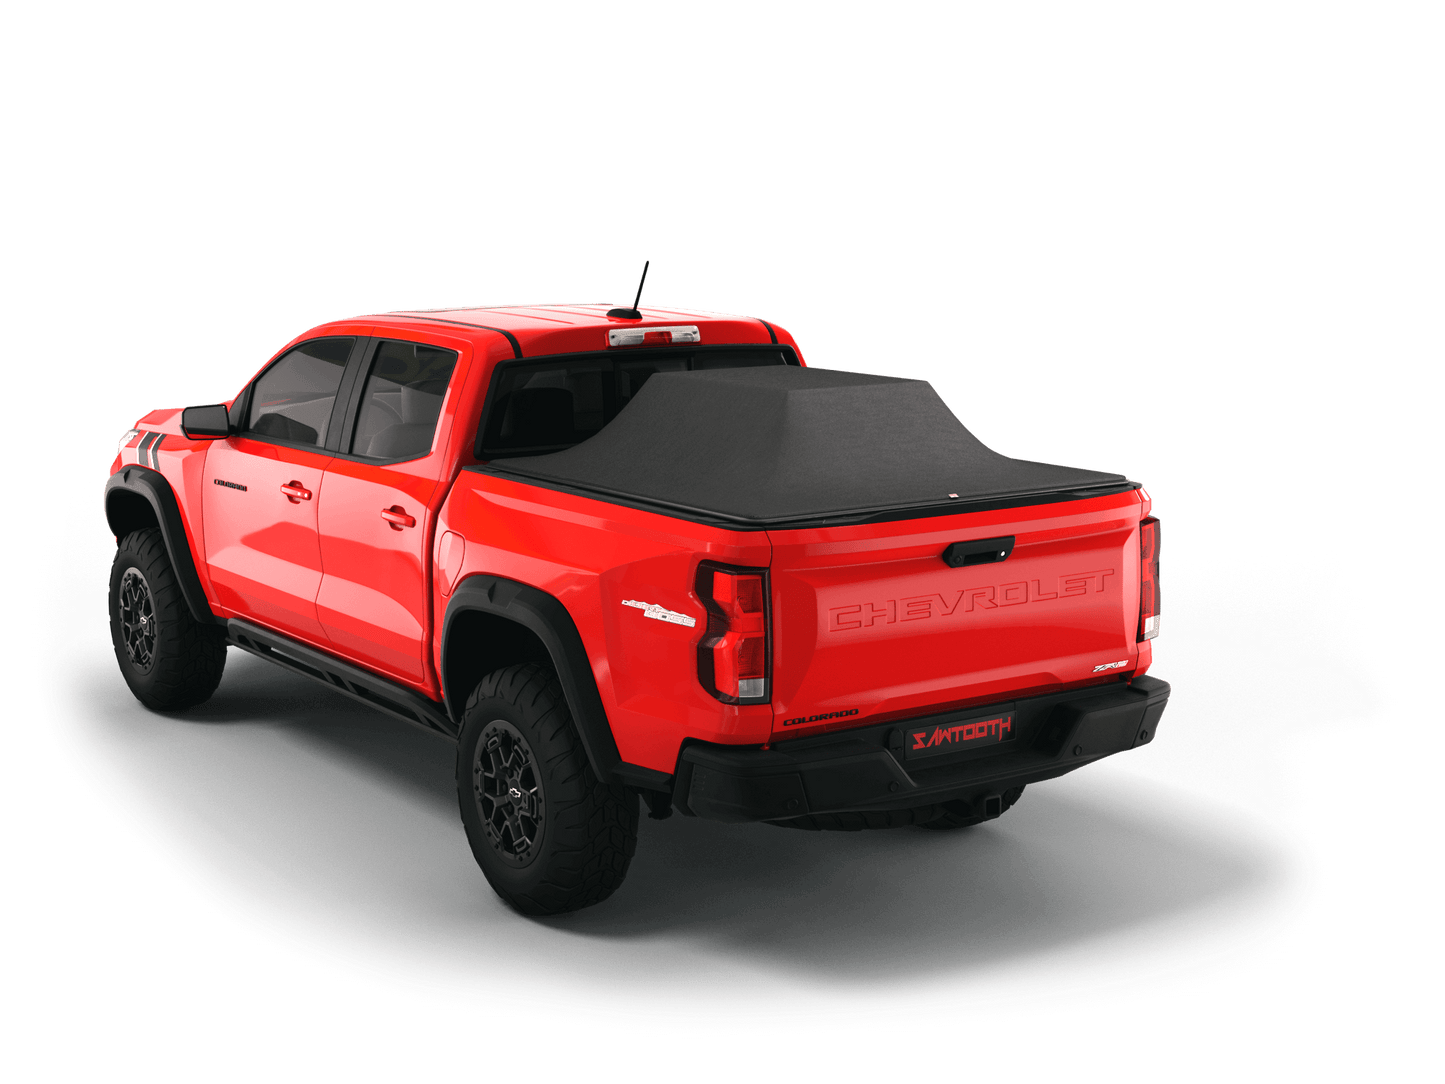 Red Chevrolet Colorado / GMC Canyon with gear in the truck bed and the Sawtooth Stretch tonneau cover expanded over cargo load